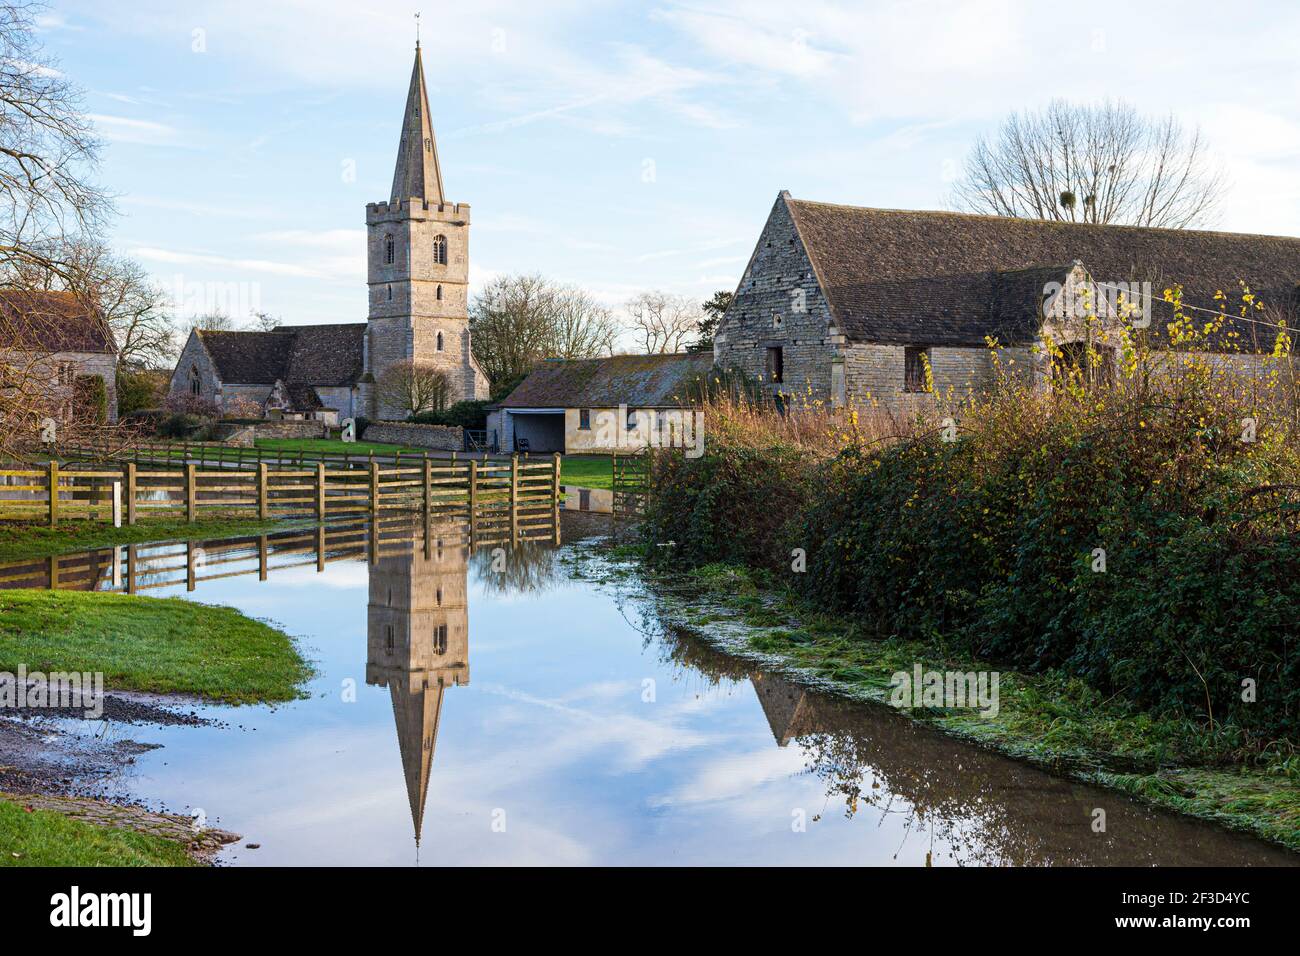 Floods by the River Severn - 29th November 2012 - the church and tithe barn reflected in the flood waters at Ashleworth, Gloucestershire, UK Stock Photo